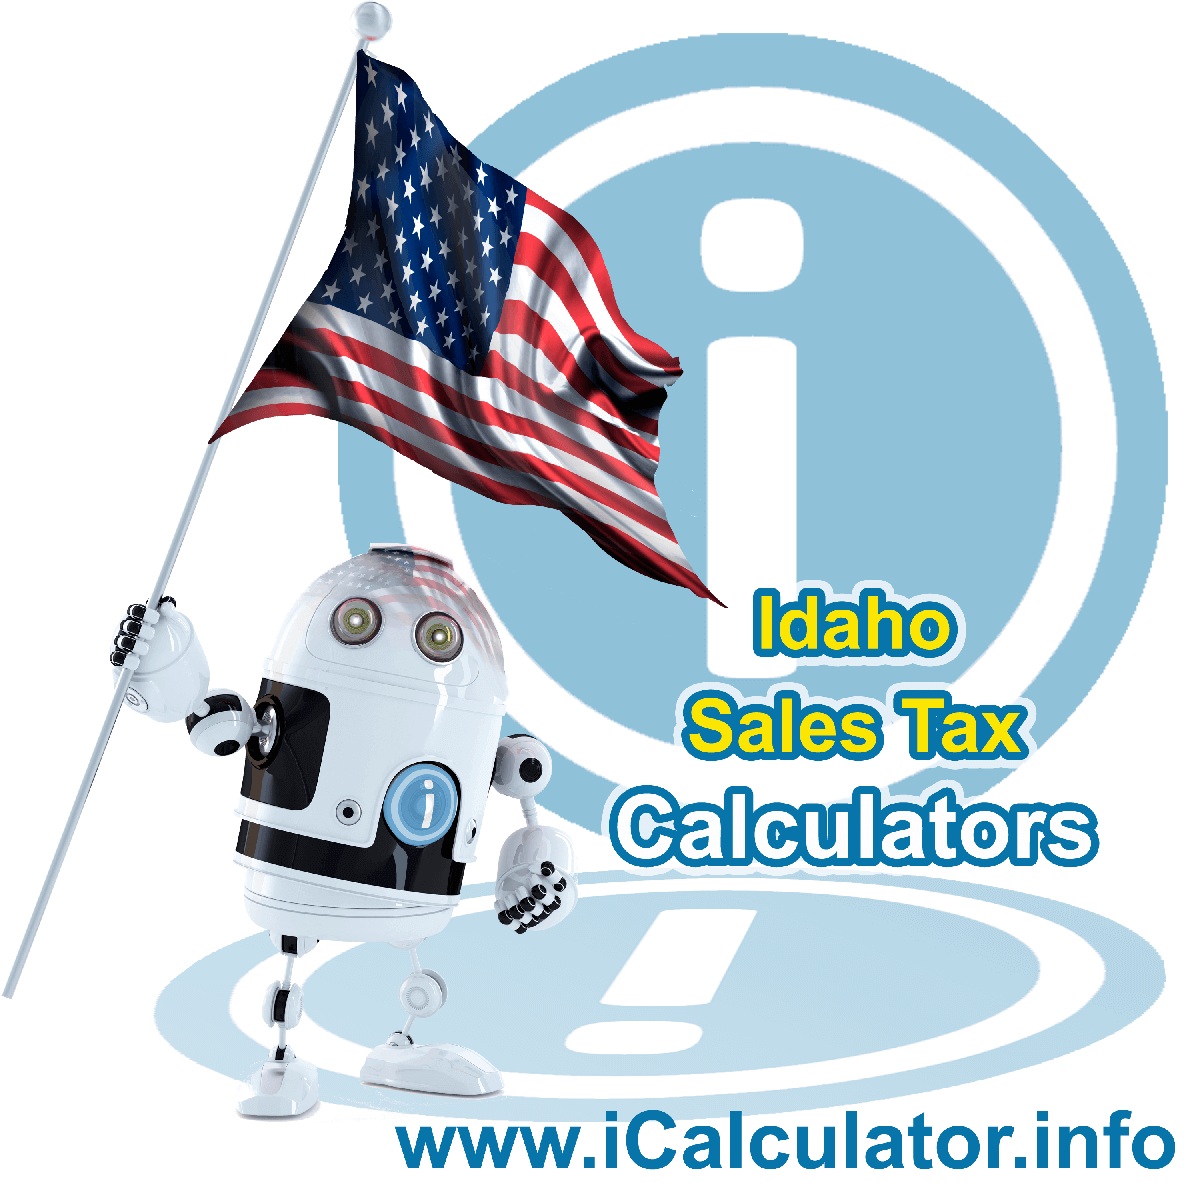 Garden City Sales Rates: This image illustrates a calculator robot calculating Garden City sales tax manually using the Garden City Sales Tax Formula. You can use this information to calculate Garden City Sales Tax manually or use the Garden City Sales Tax Calculator to calculate sales tax online.